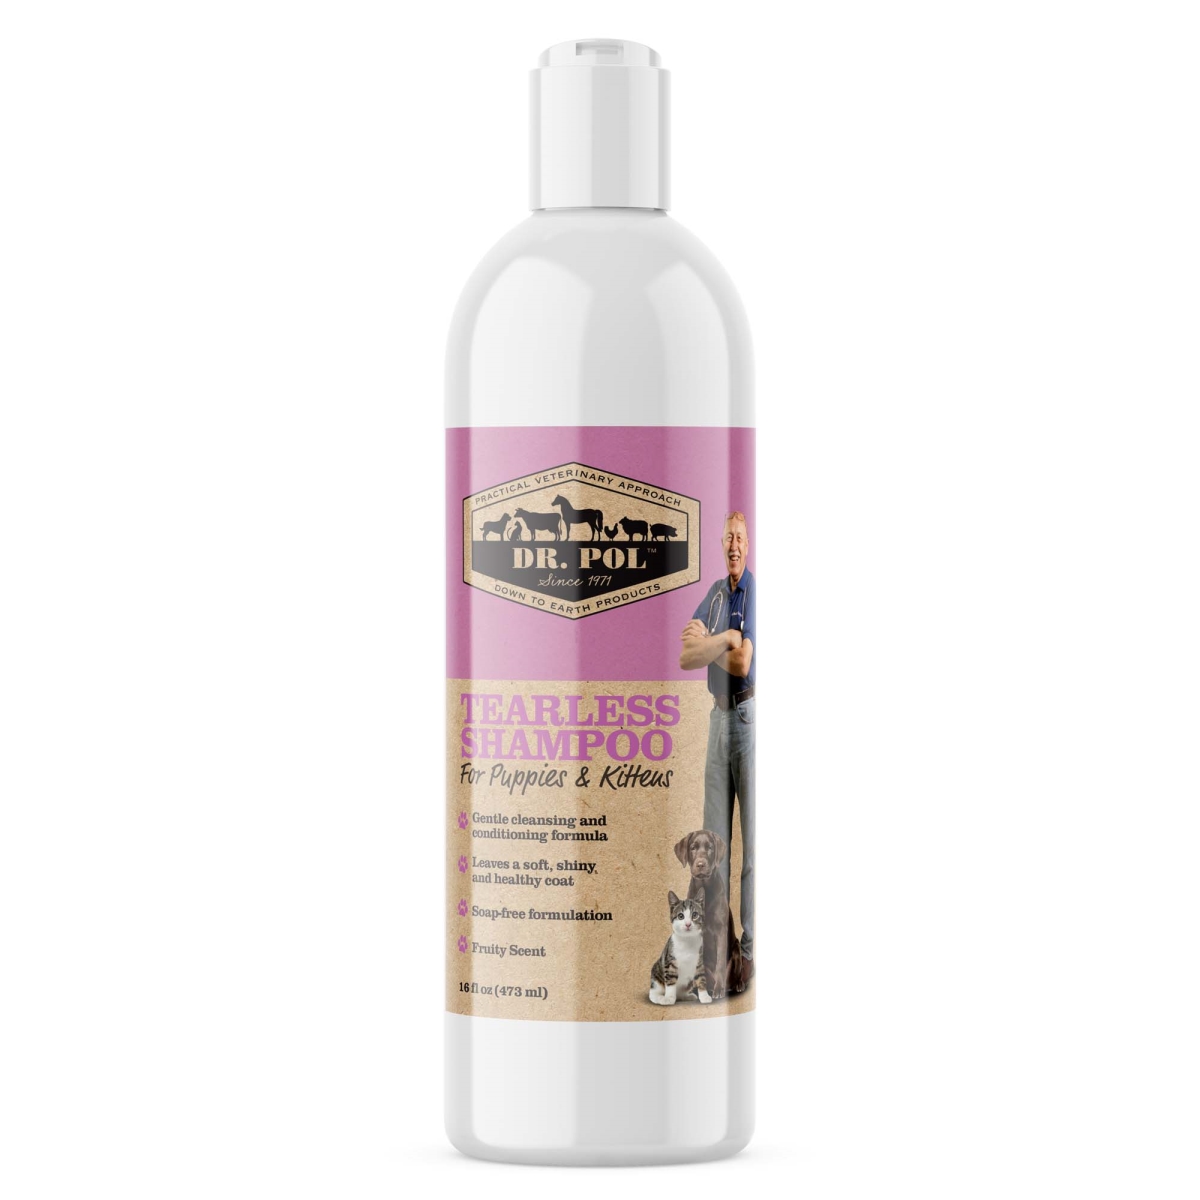 Picture of Dr. Pol 860007790102 16 oz Tearless Shampoo for Puppies & Kittens